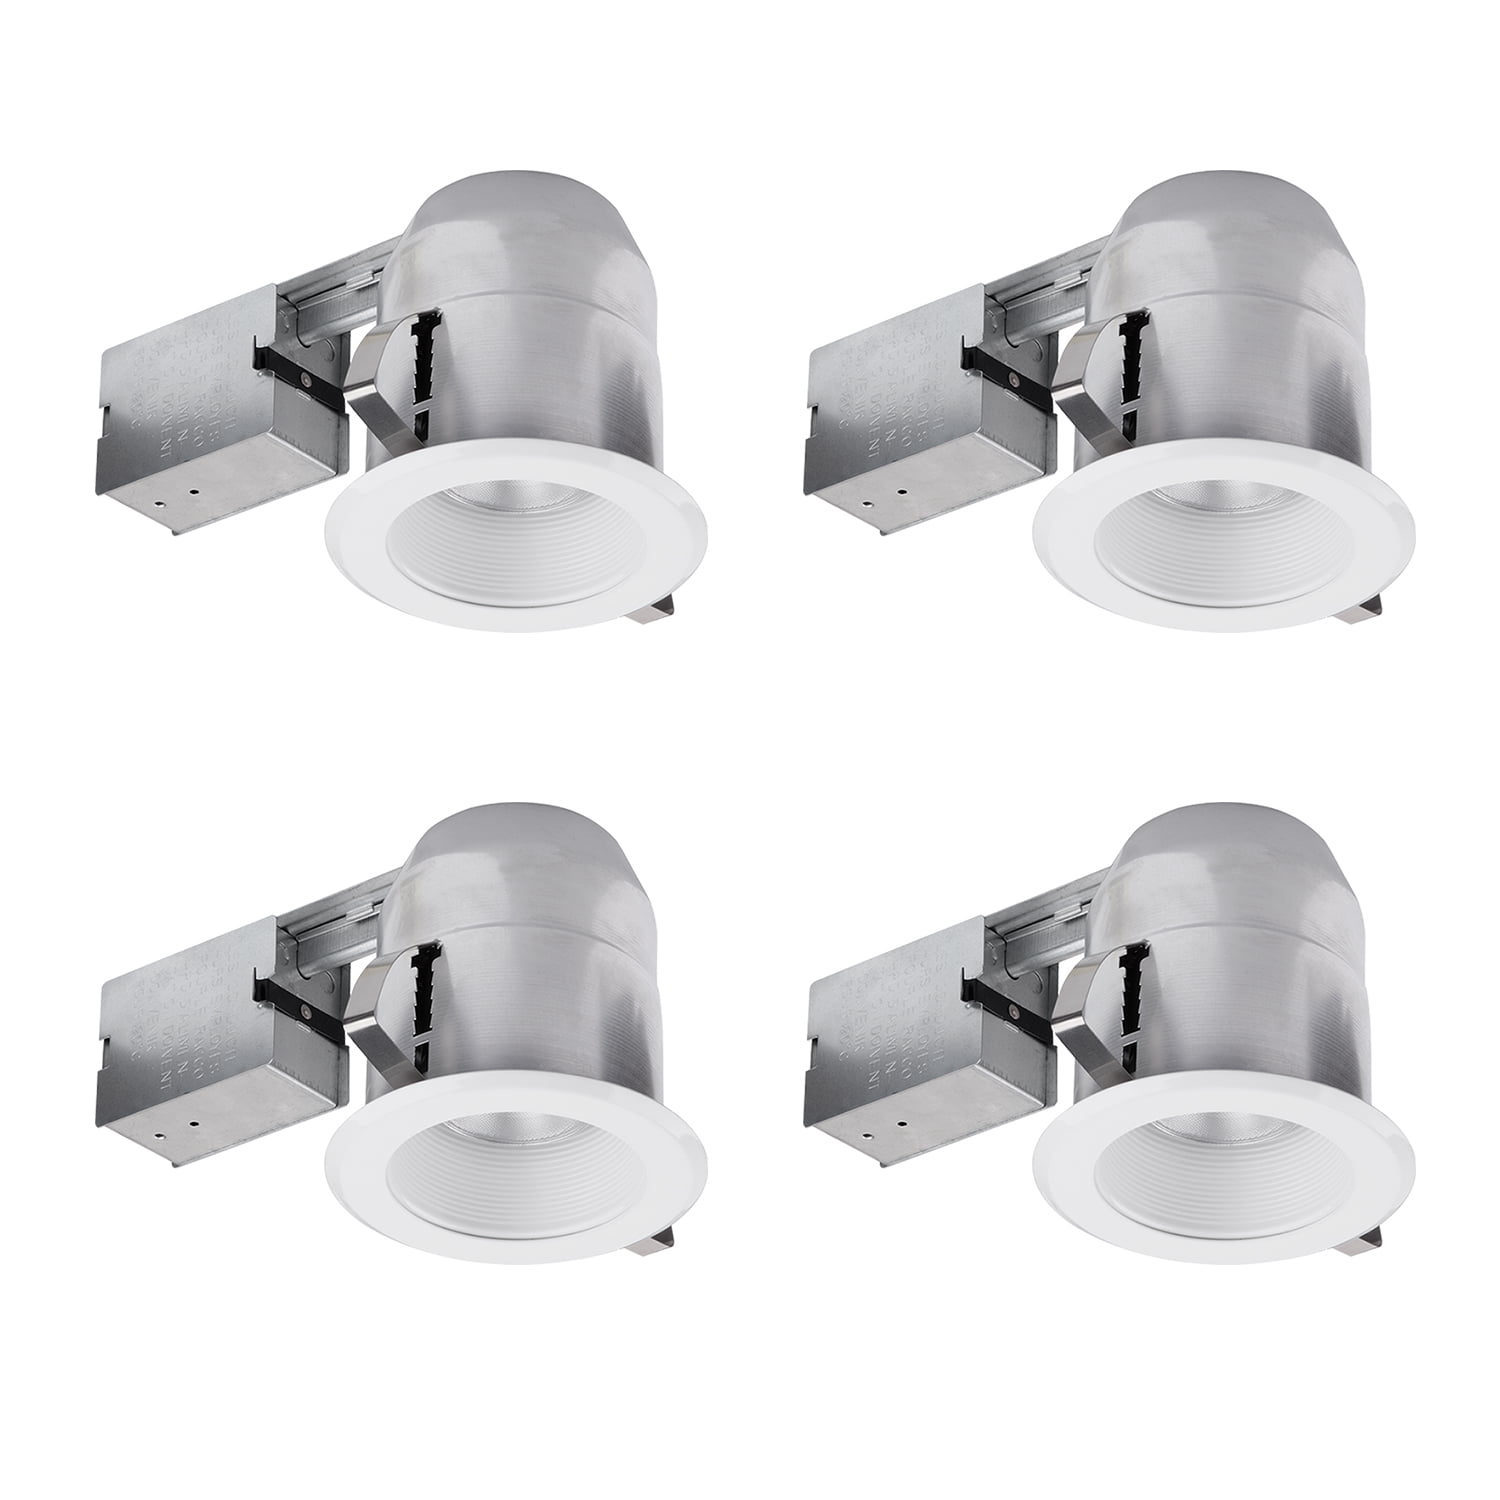 4 Pack Globe Electric 91014 5 inch Recessed Lighting Kit 